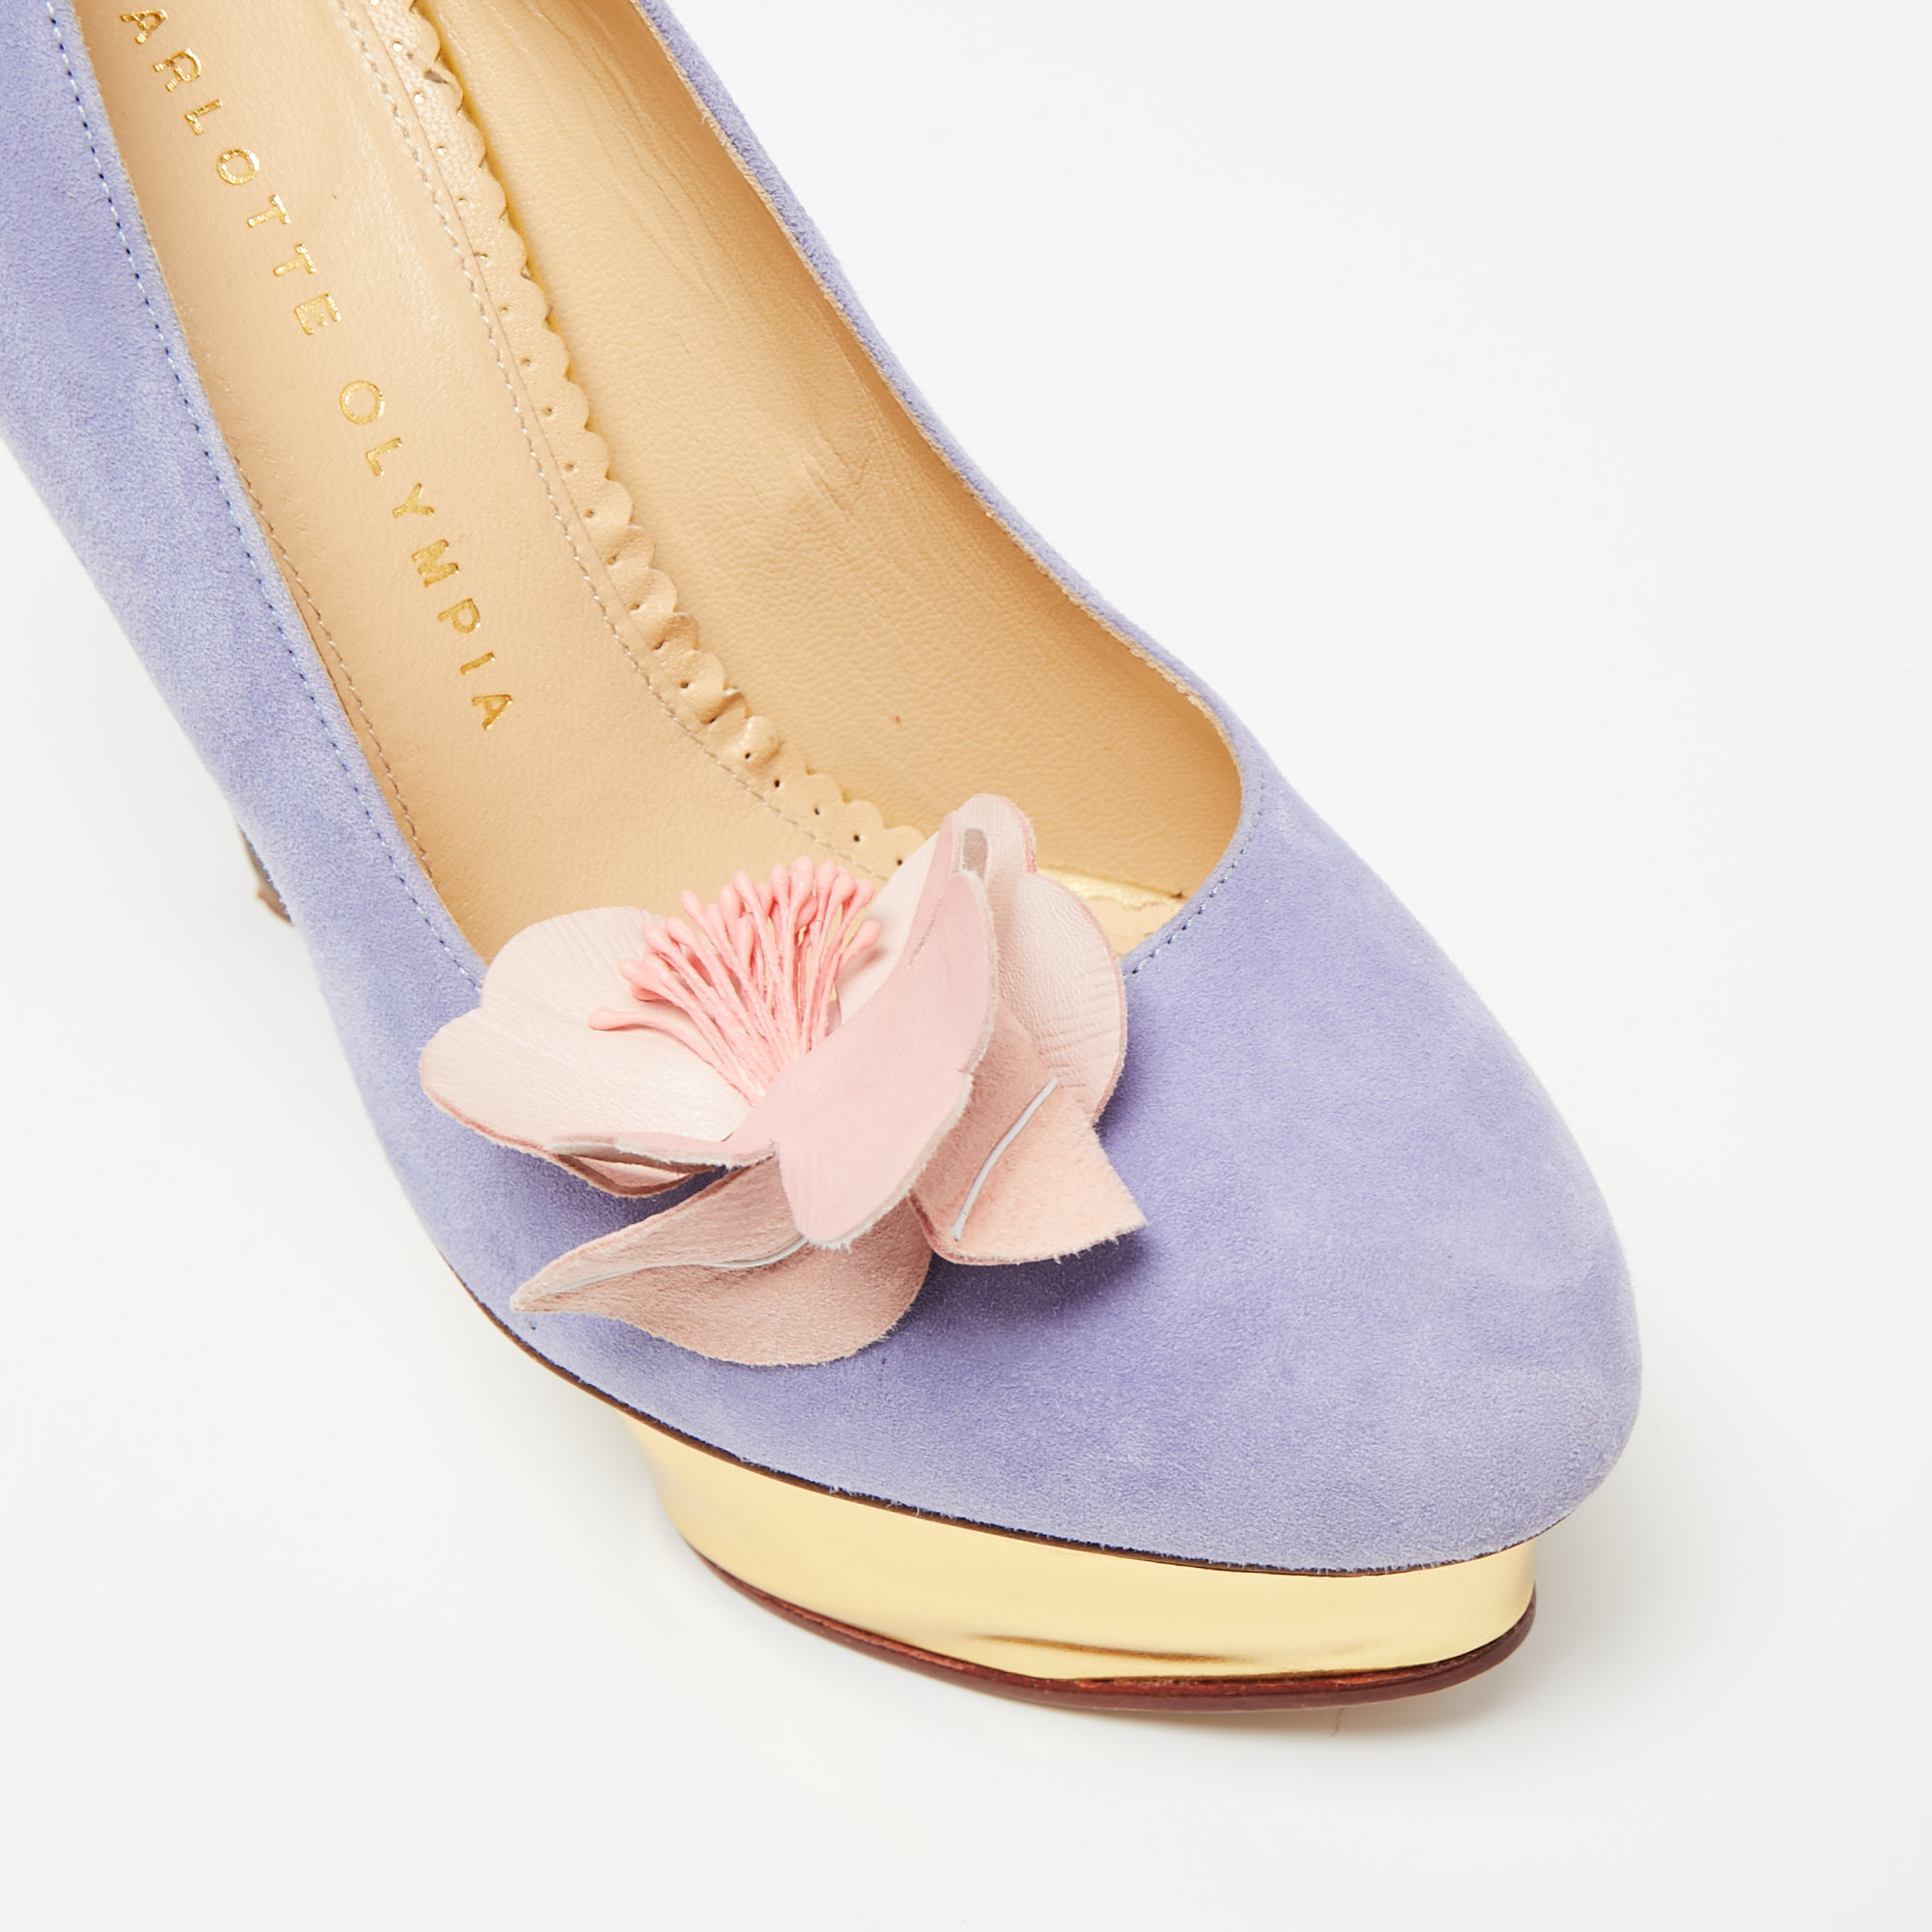 Charlotte Olympia Lavender Suede Dolly Platform Pumps Size 37